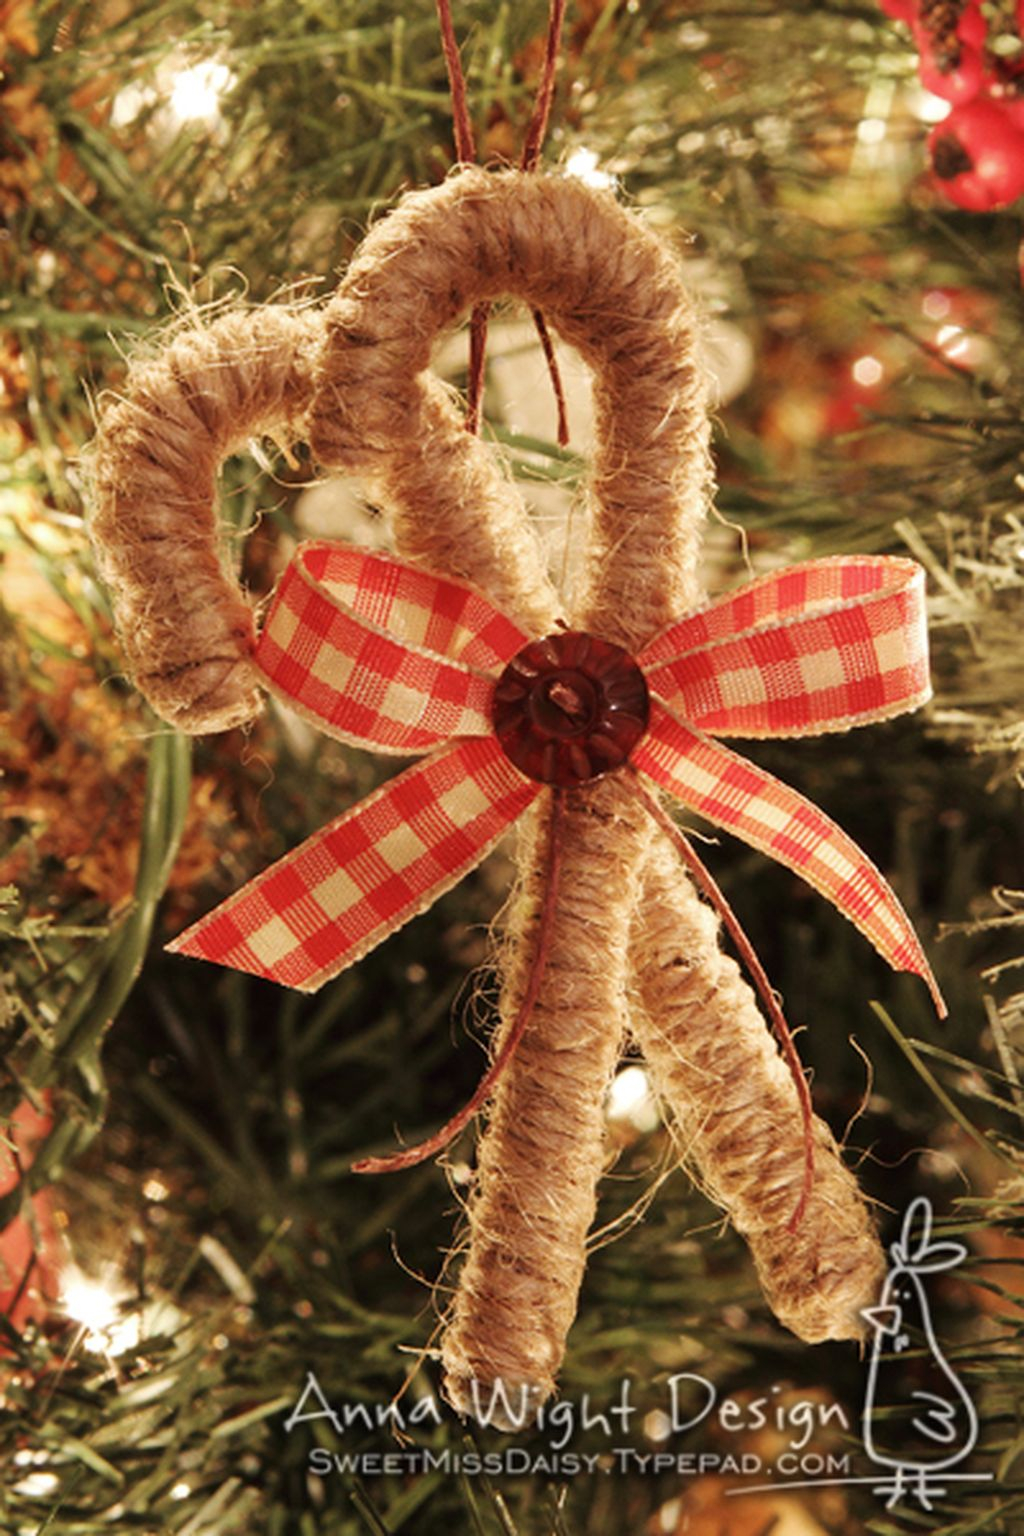 Inspiring Rustic Christmas Tree Decoration Ideas For Cheerful Day 24